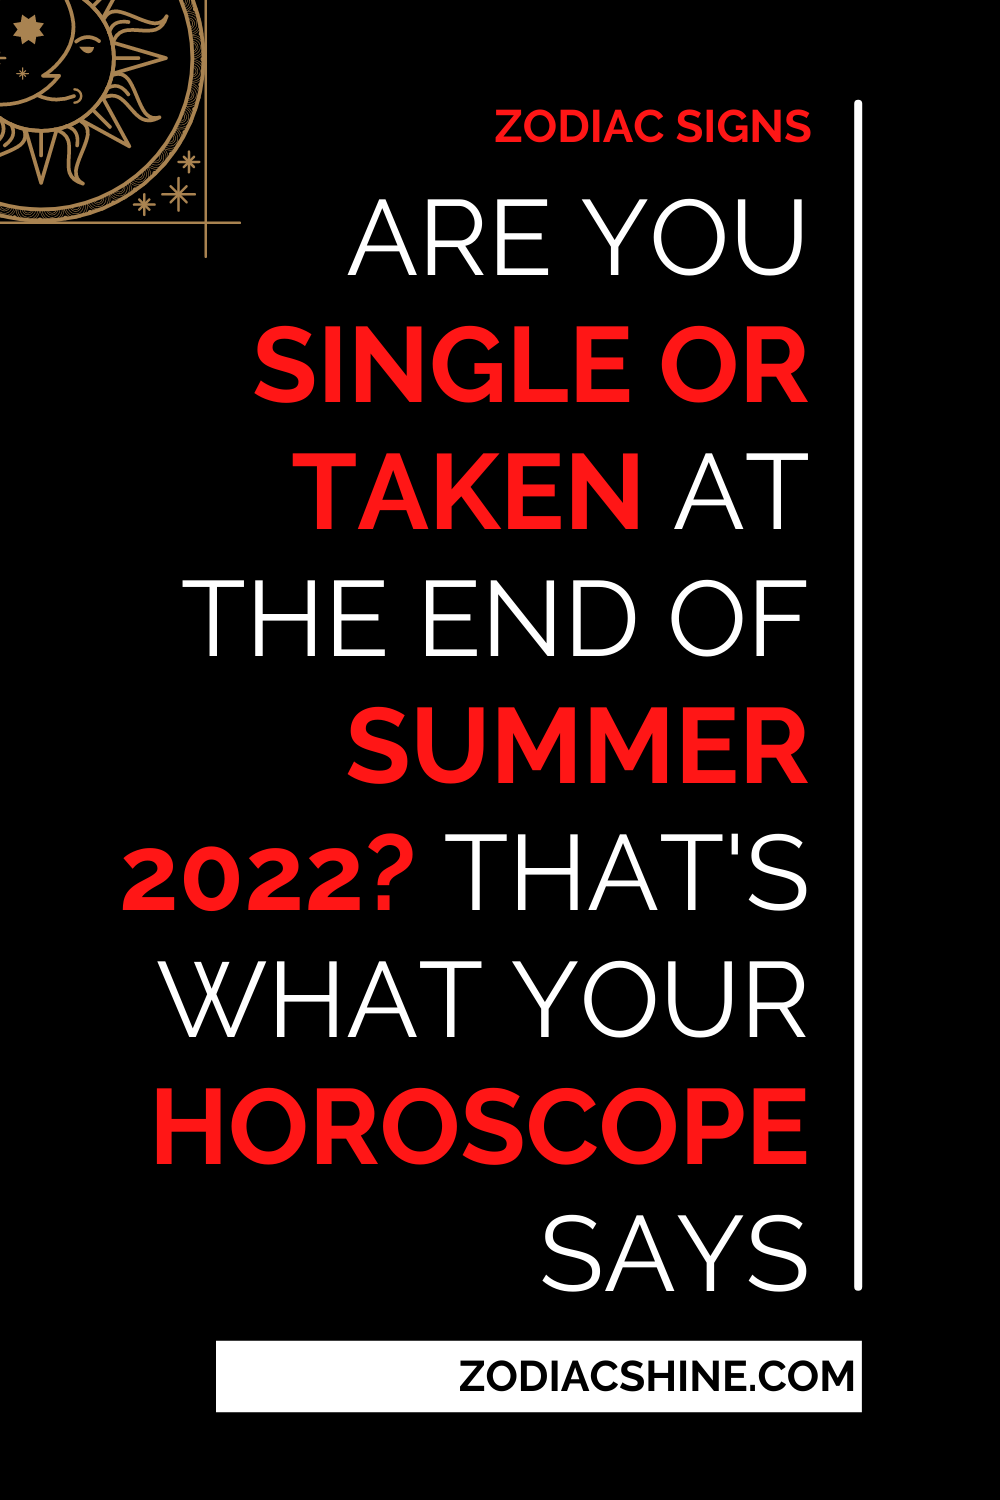 Are You Single Or Taken At The End Of Summer 2022? That's What Your Horoscope Says